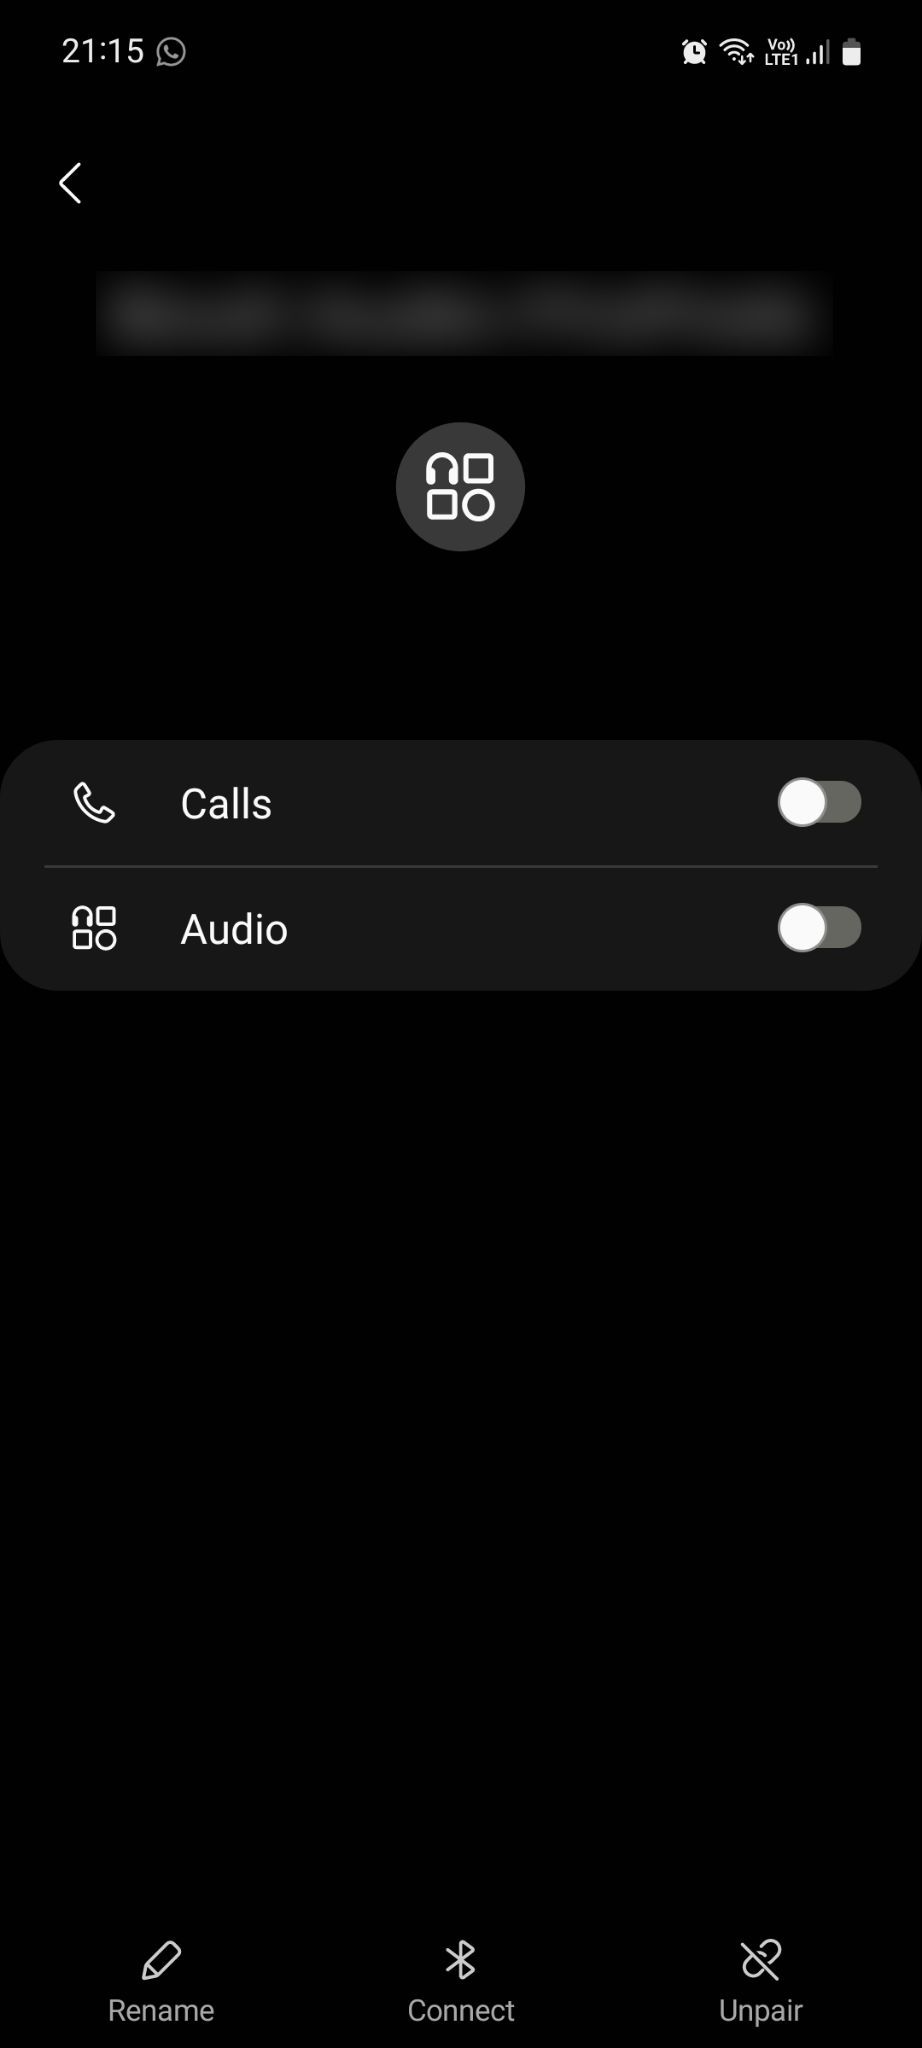 Samsung Connections paired Bluetooth device menu